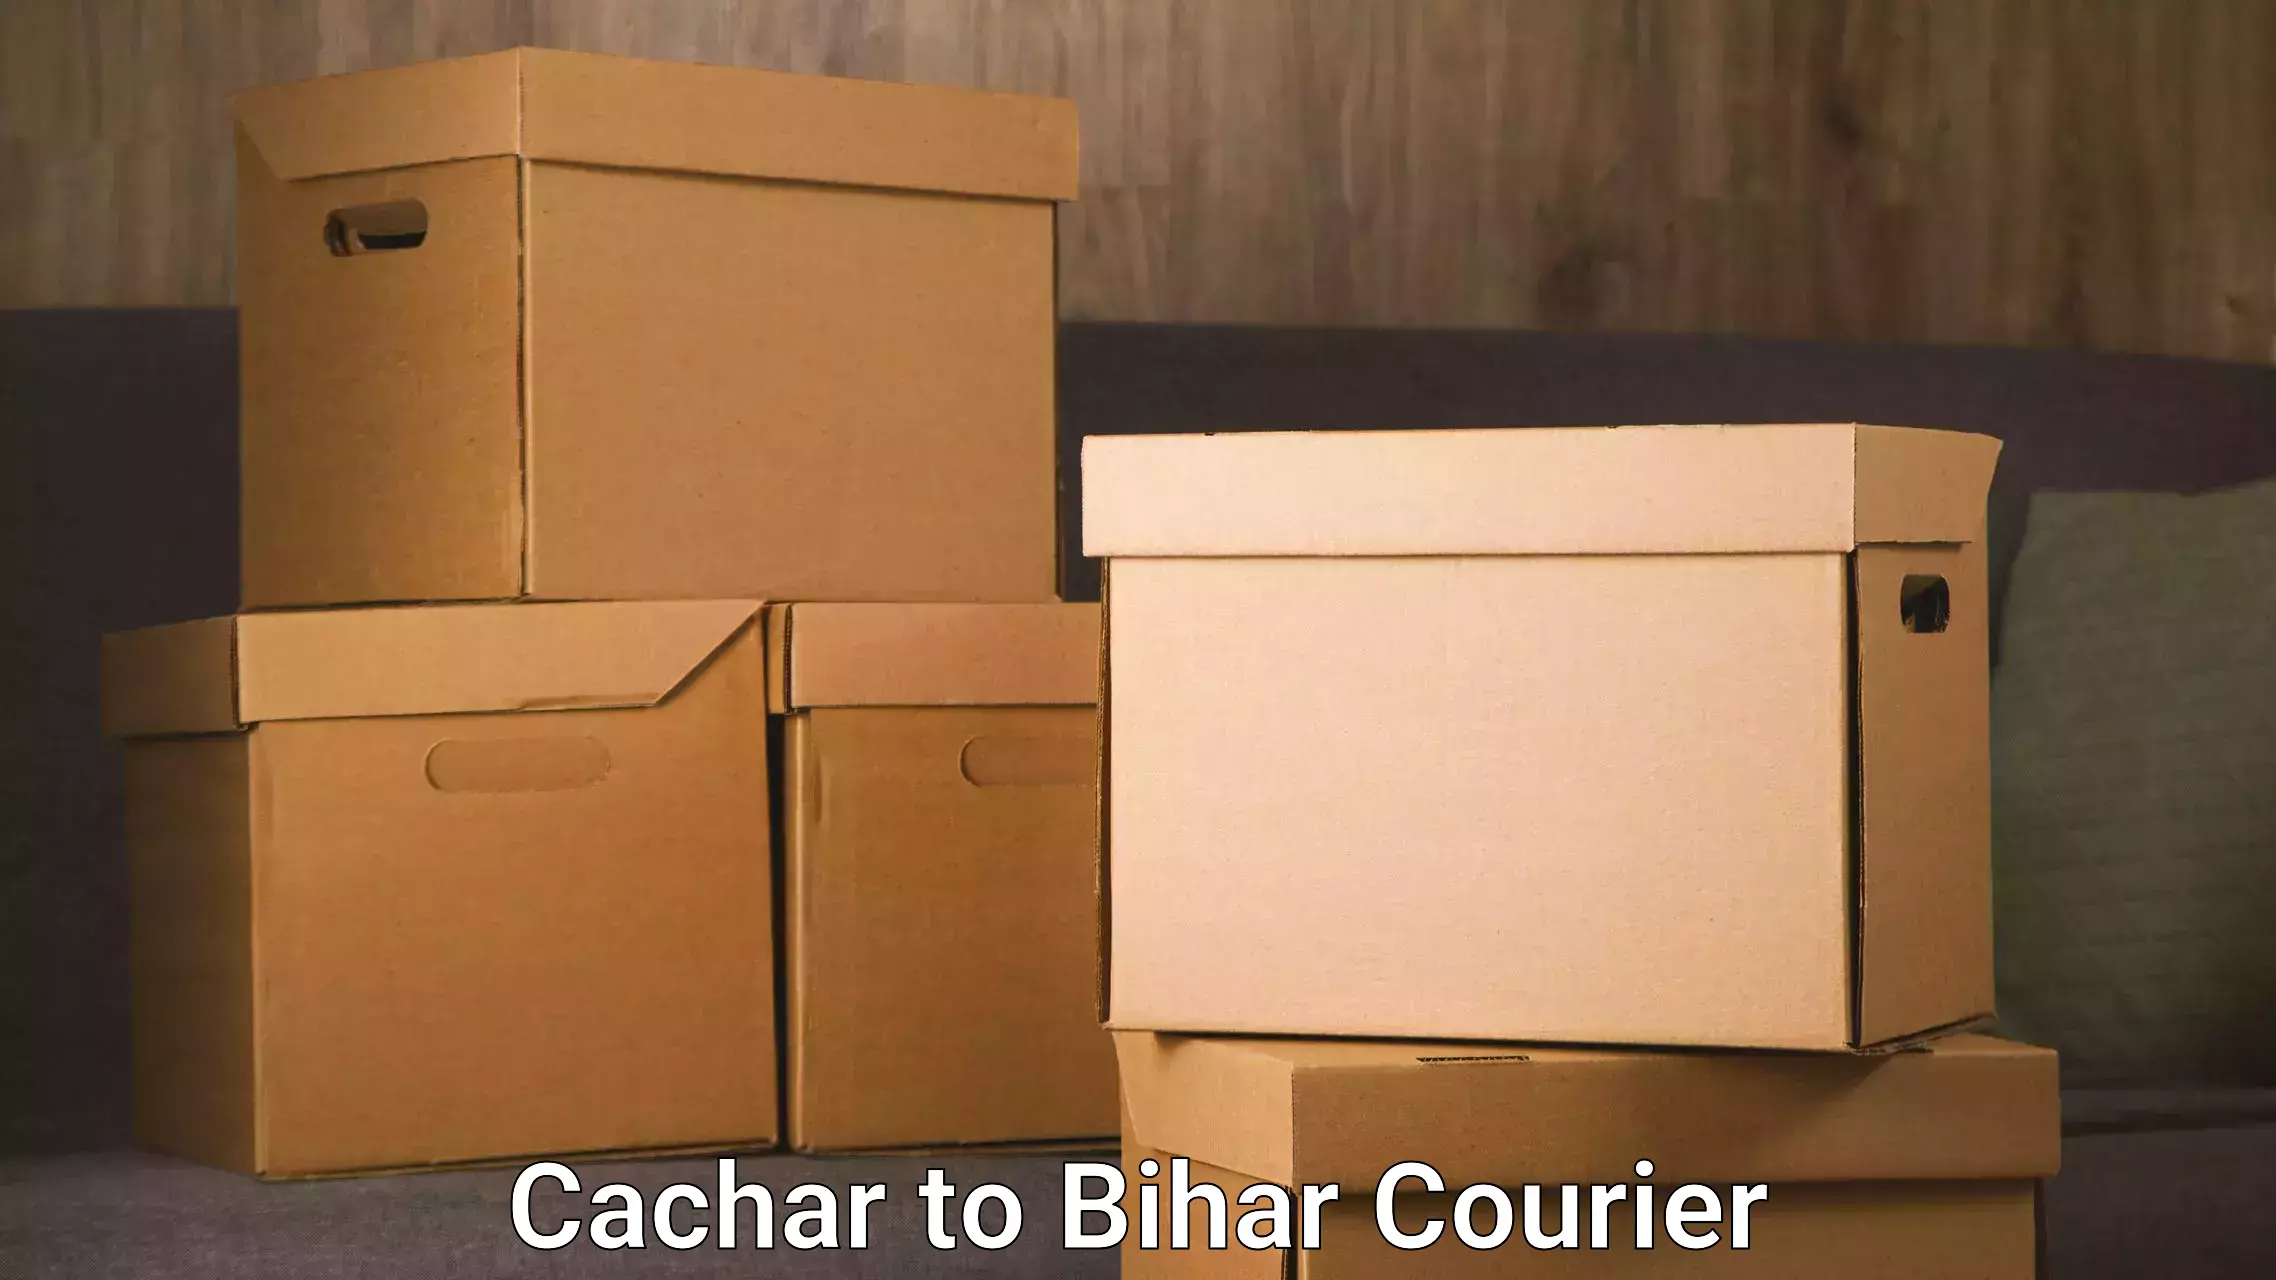 Courier rate comparison in Cachar to Mohania